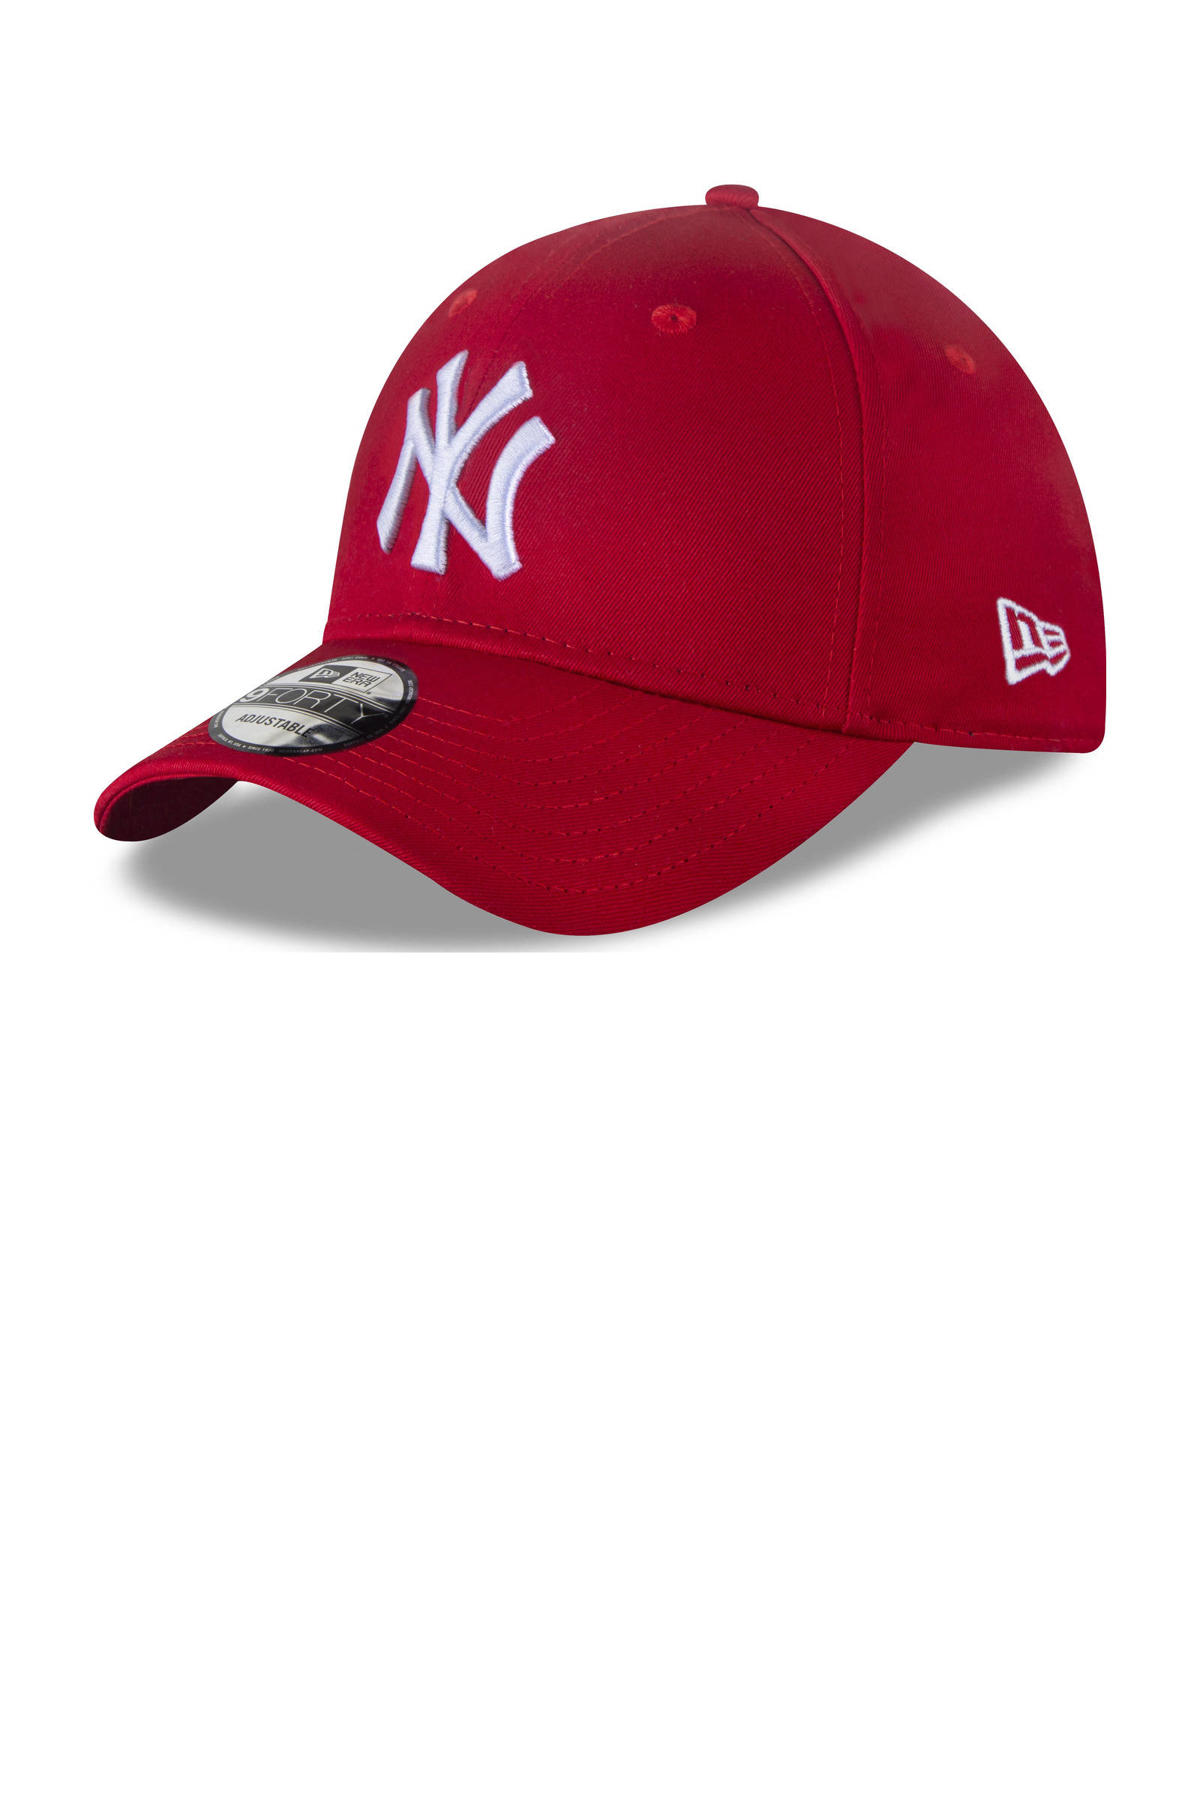 Frons Anesthesie Bliksem New Era 9Forty pet rood/wit | wehkamp